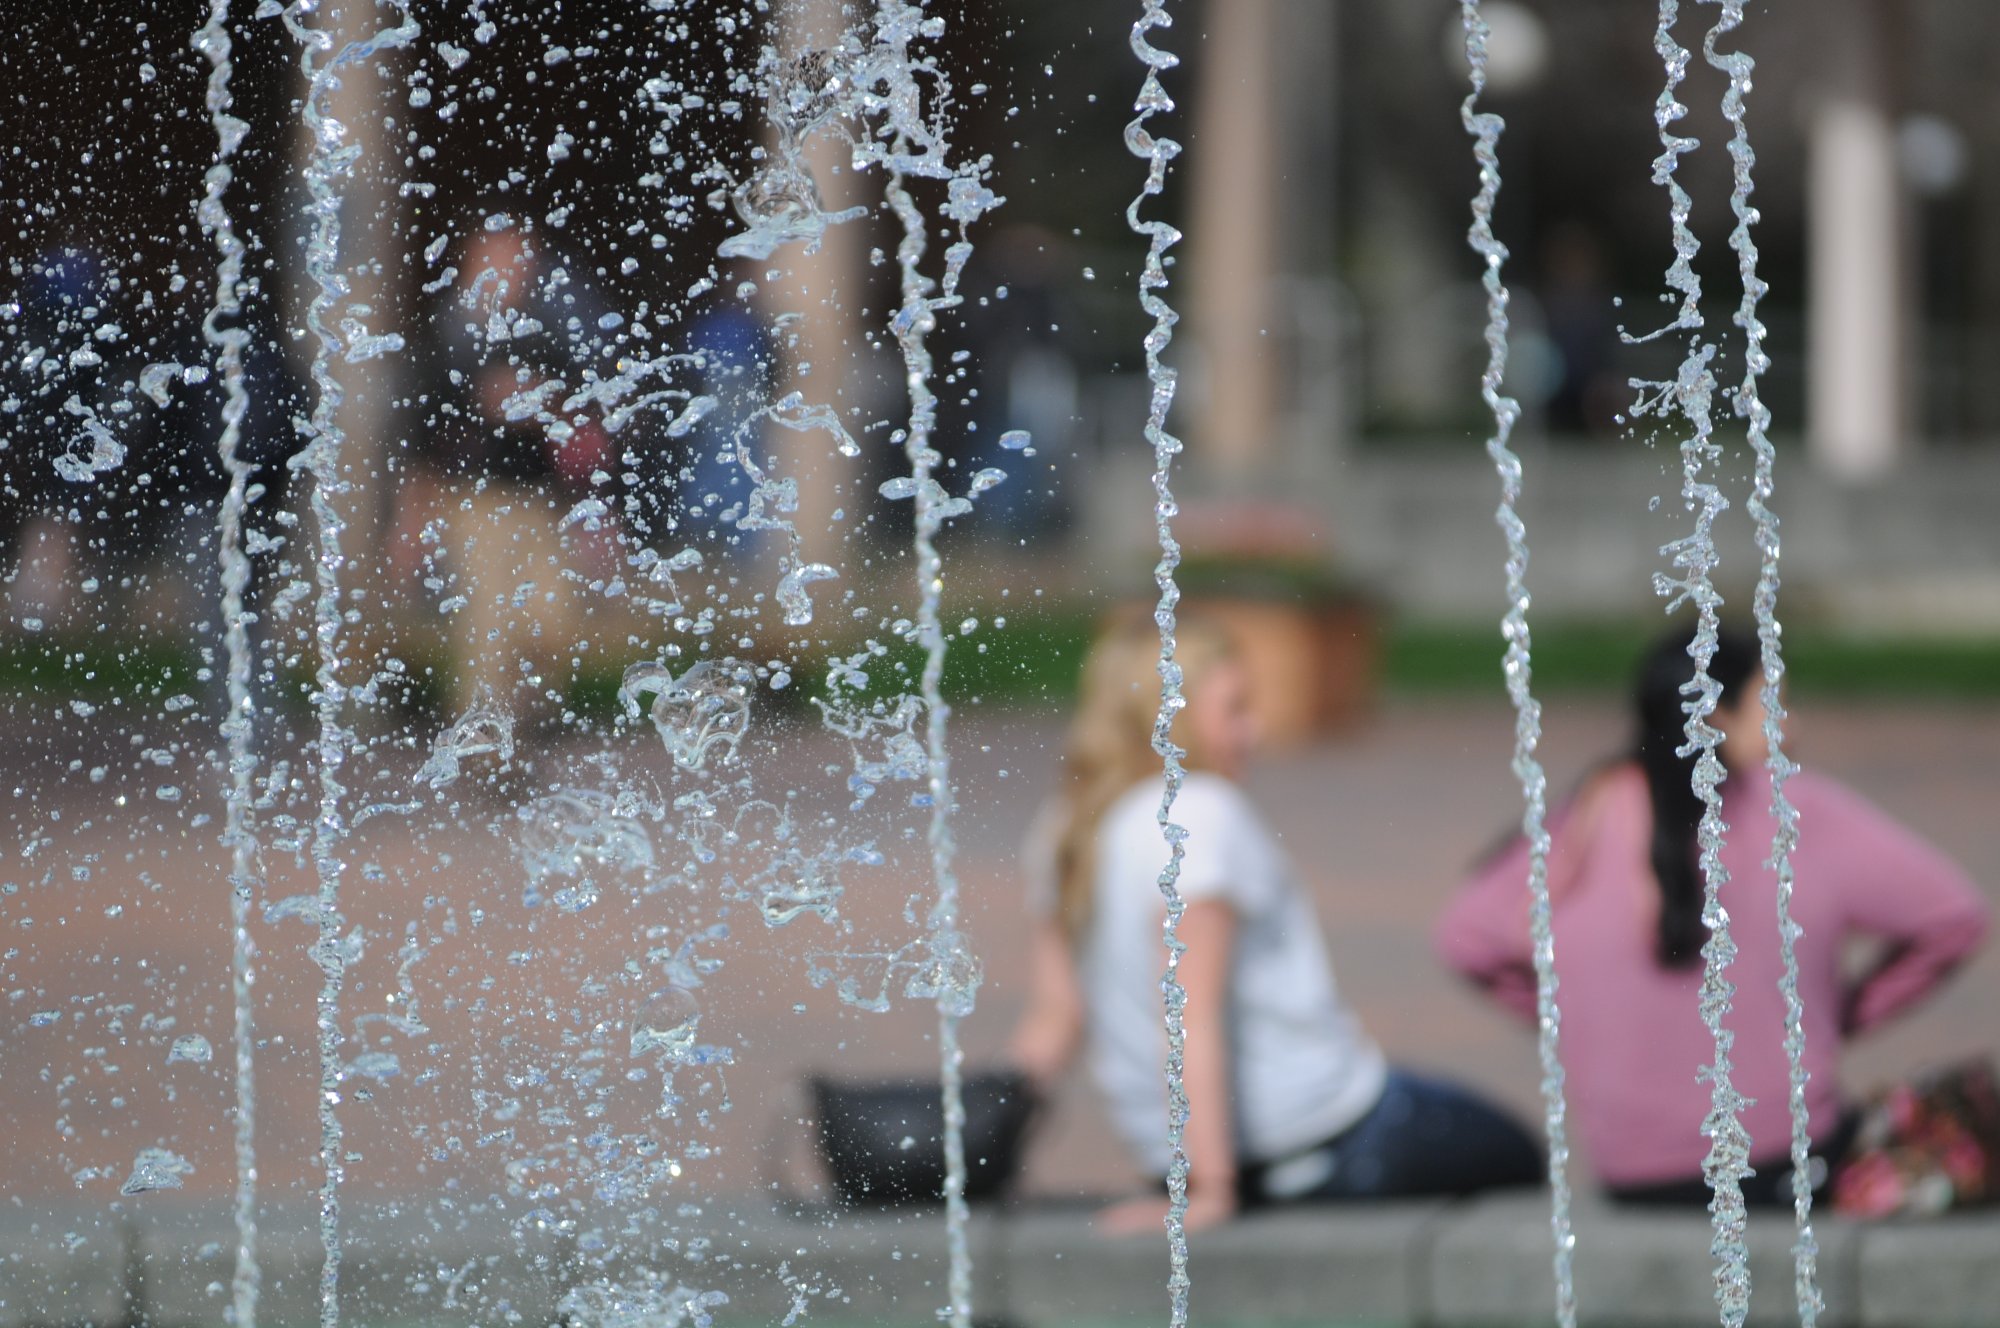 Fountain in Red Square at Western Washington University with people sitting in background.